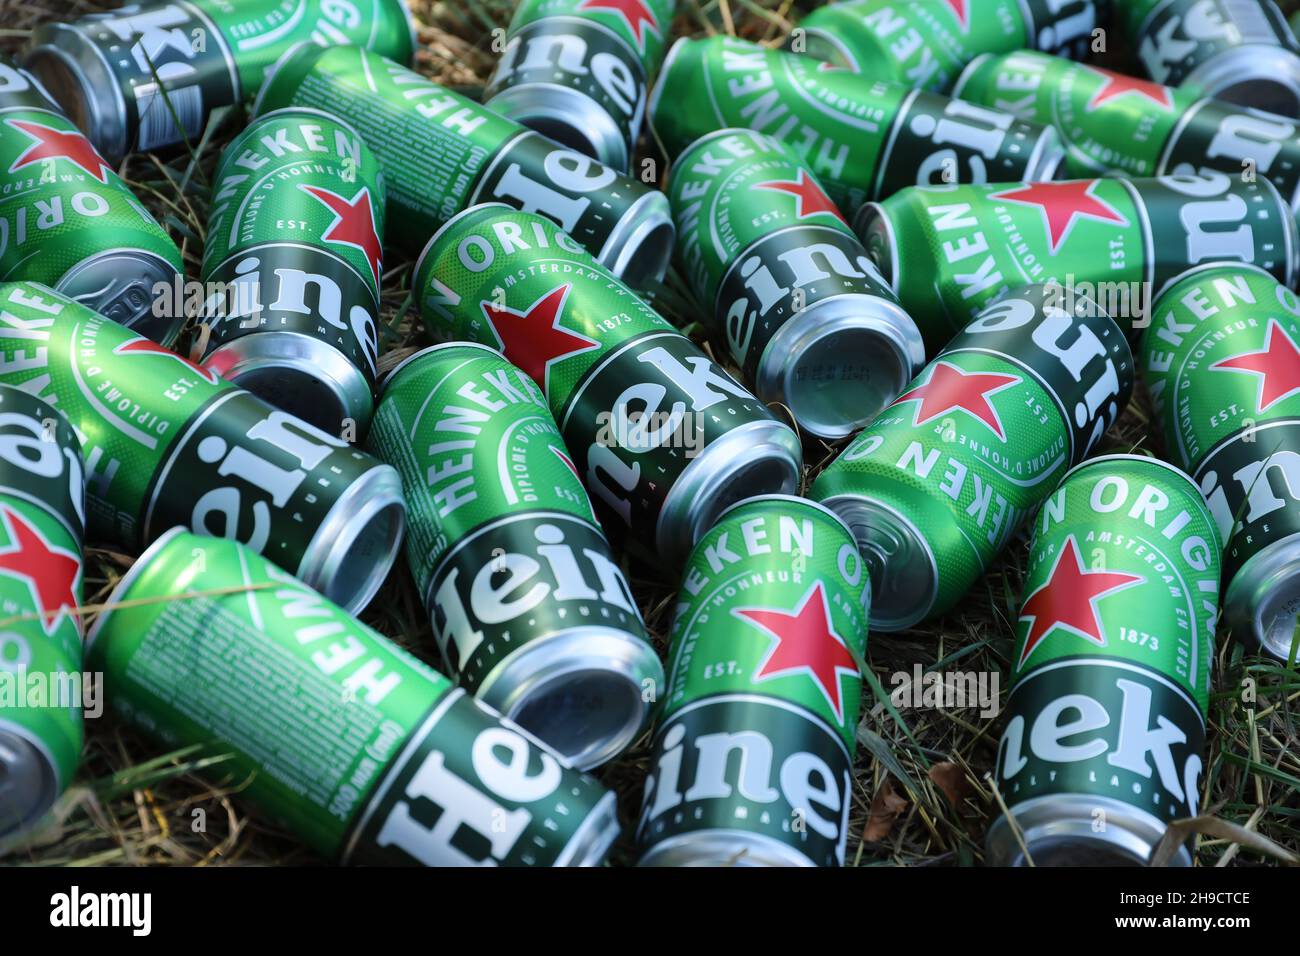 KHARKOV, UKRAINE - JULY 31, 2021: Green tin cans of Heineken pale lager beer produced by the Dutch brewing company Heineken N.V. Stock Photo